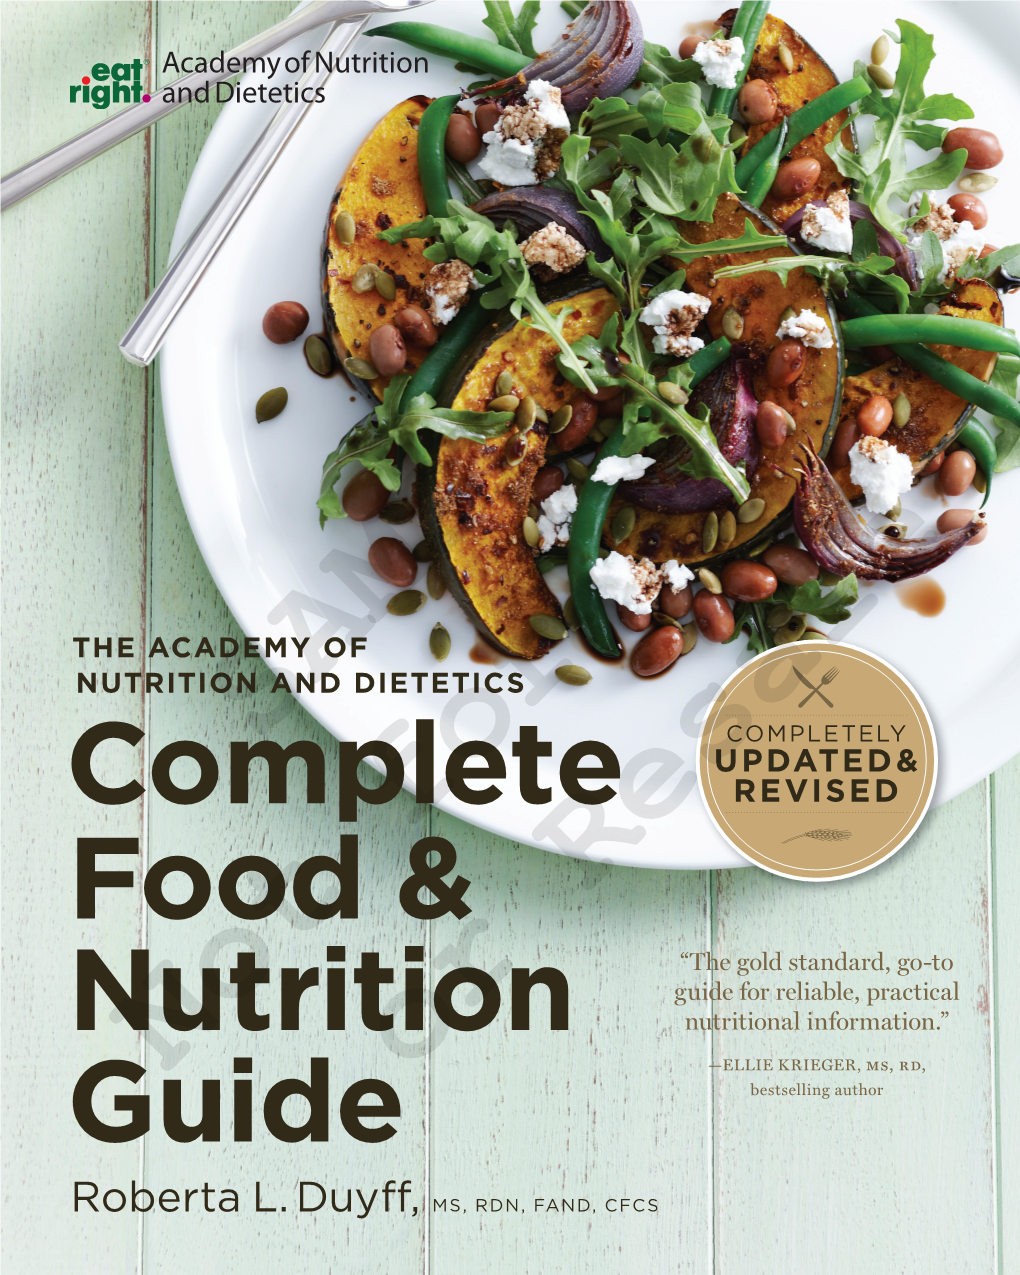 Complete Food & Nutrition Guide